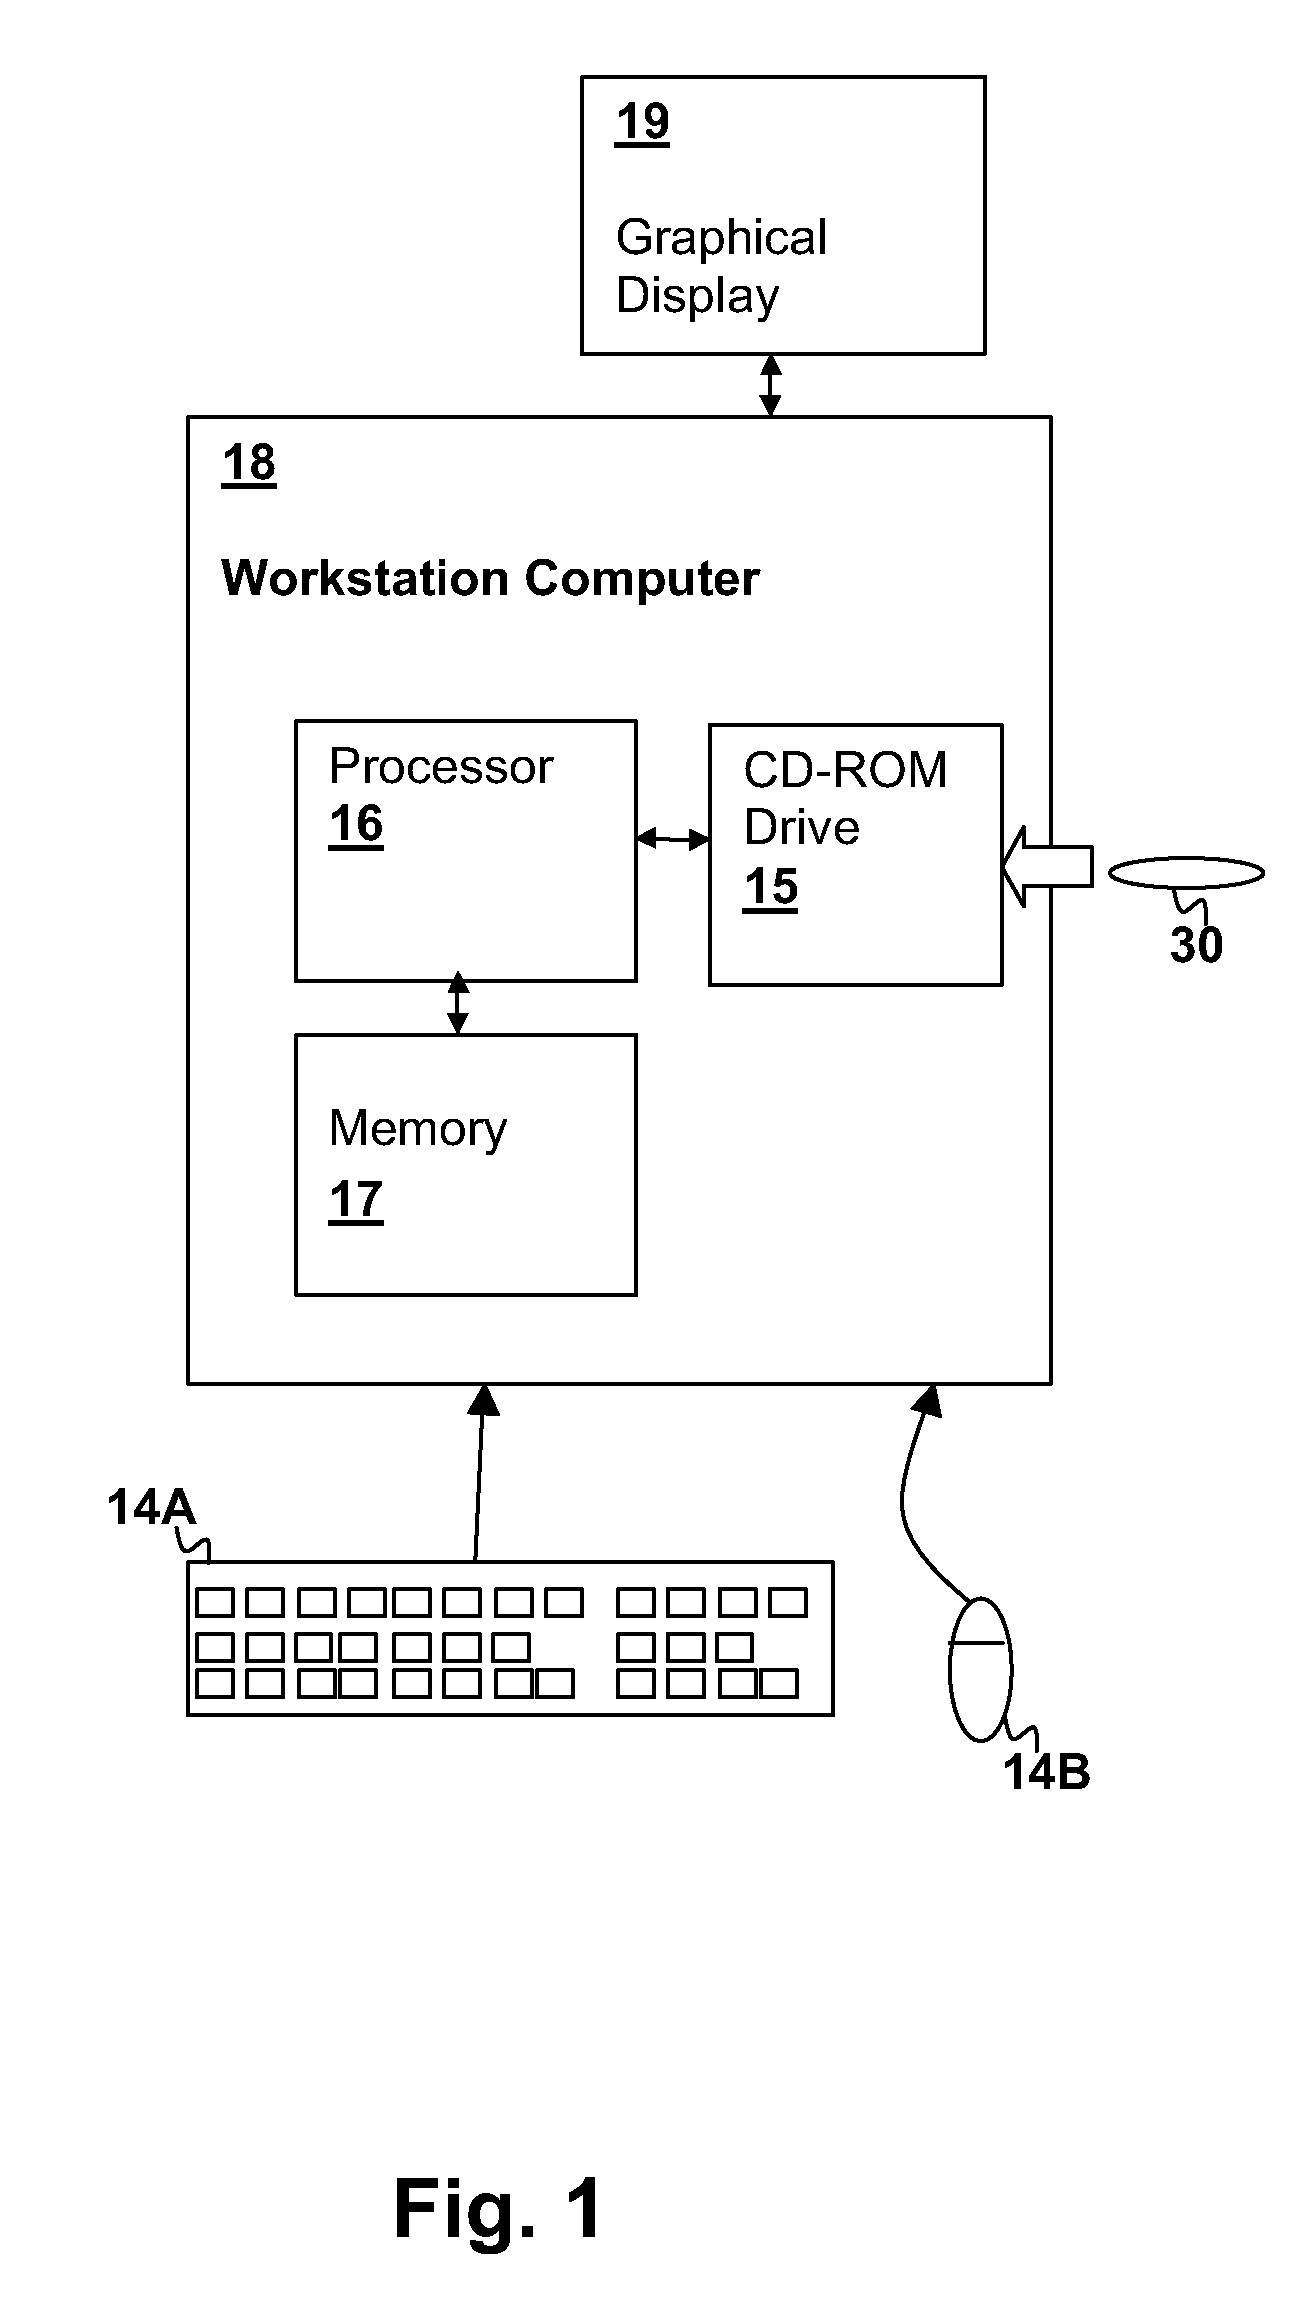 Method for verifying performance of an array by simulating operation of edge cells in a full array model